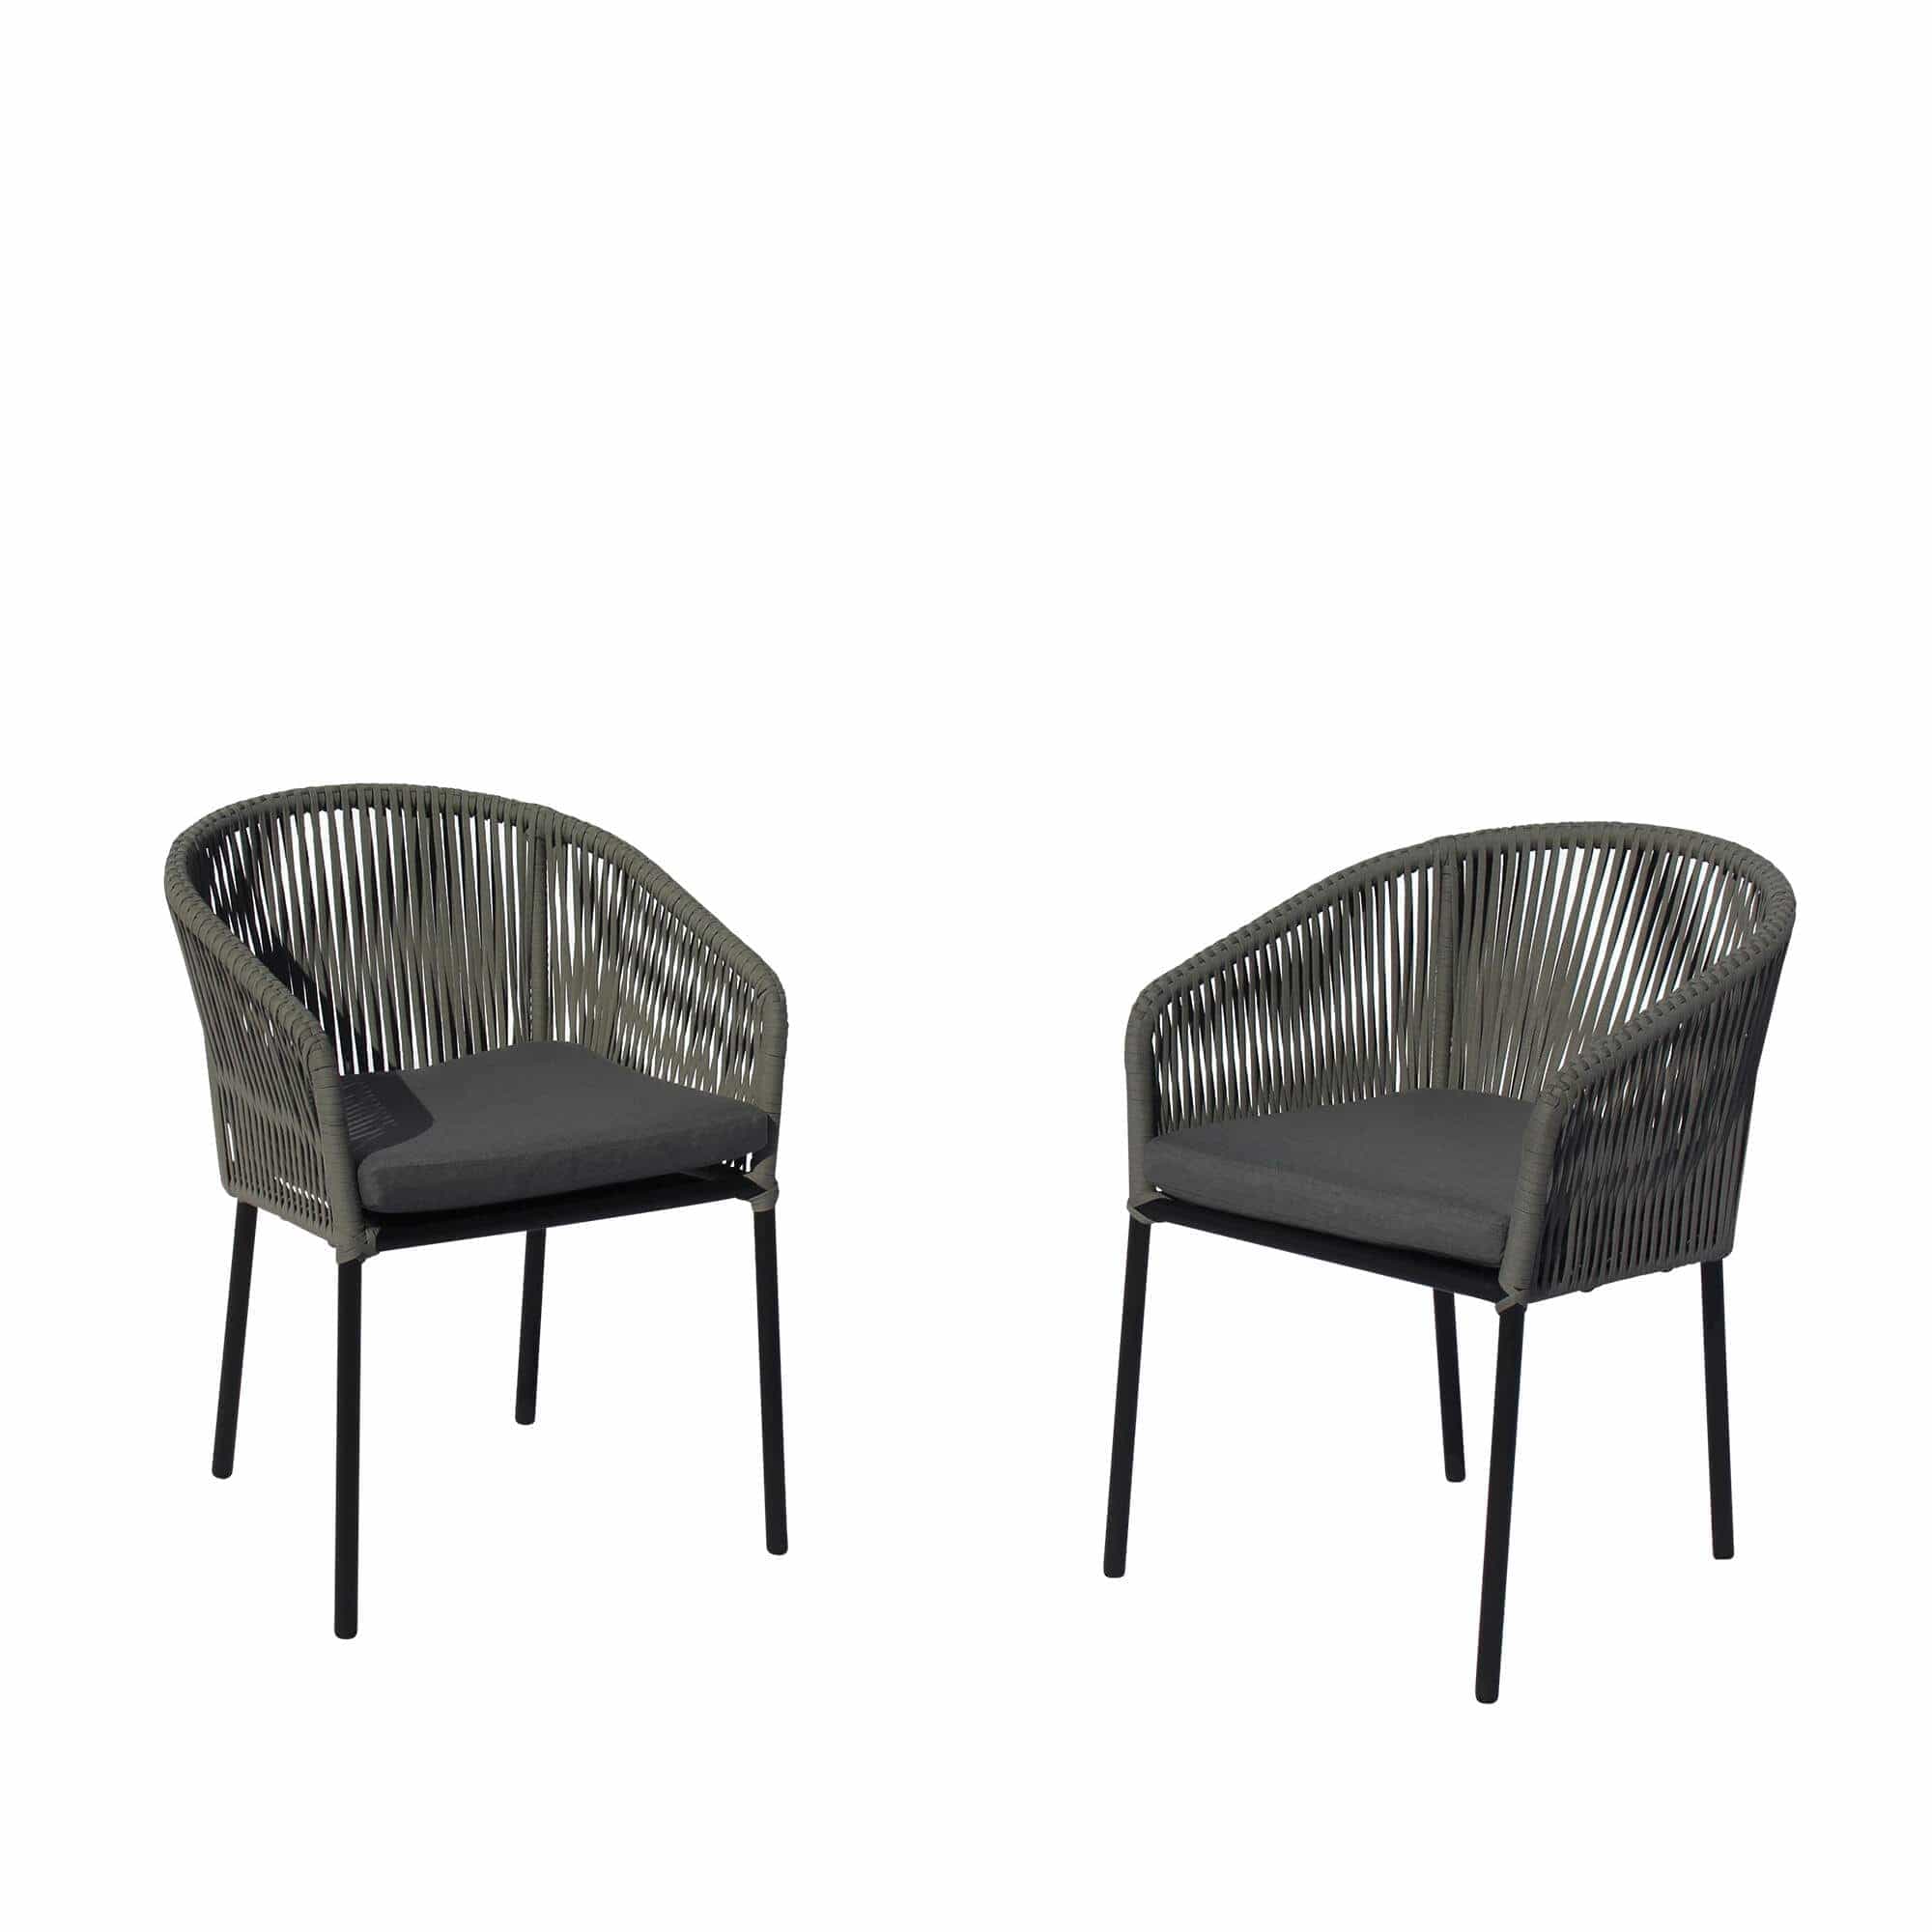 Courtyard Casual Outdoor Dining Chair Courtyard Casual -  Osborne Black Aluminum Outdoor Dining Chairs, 2 pc set with Cushions | 5088